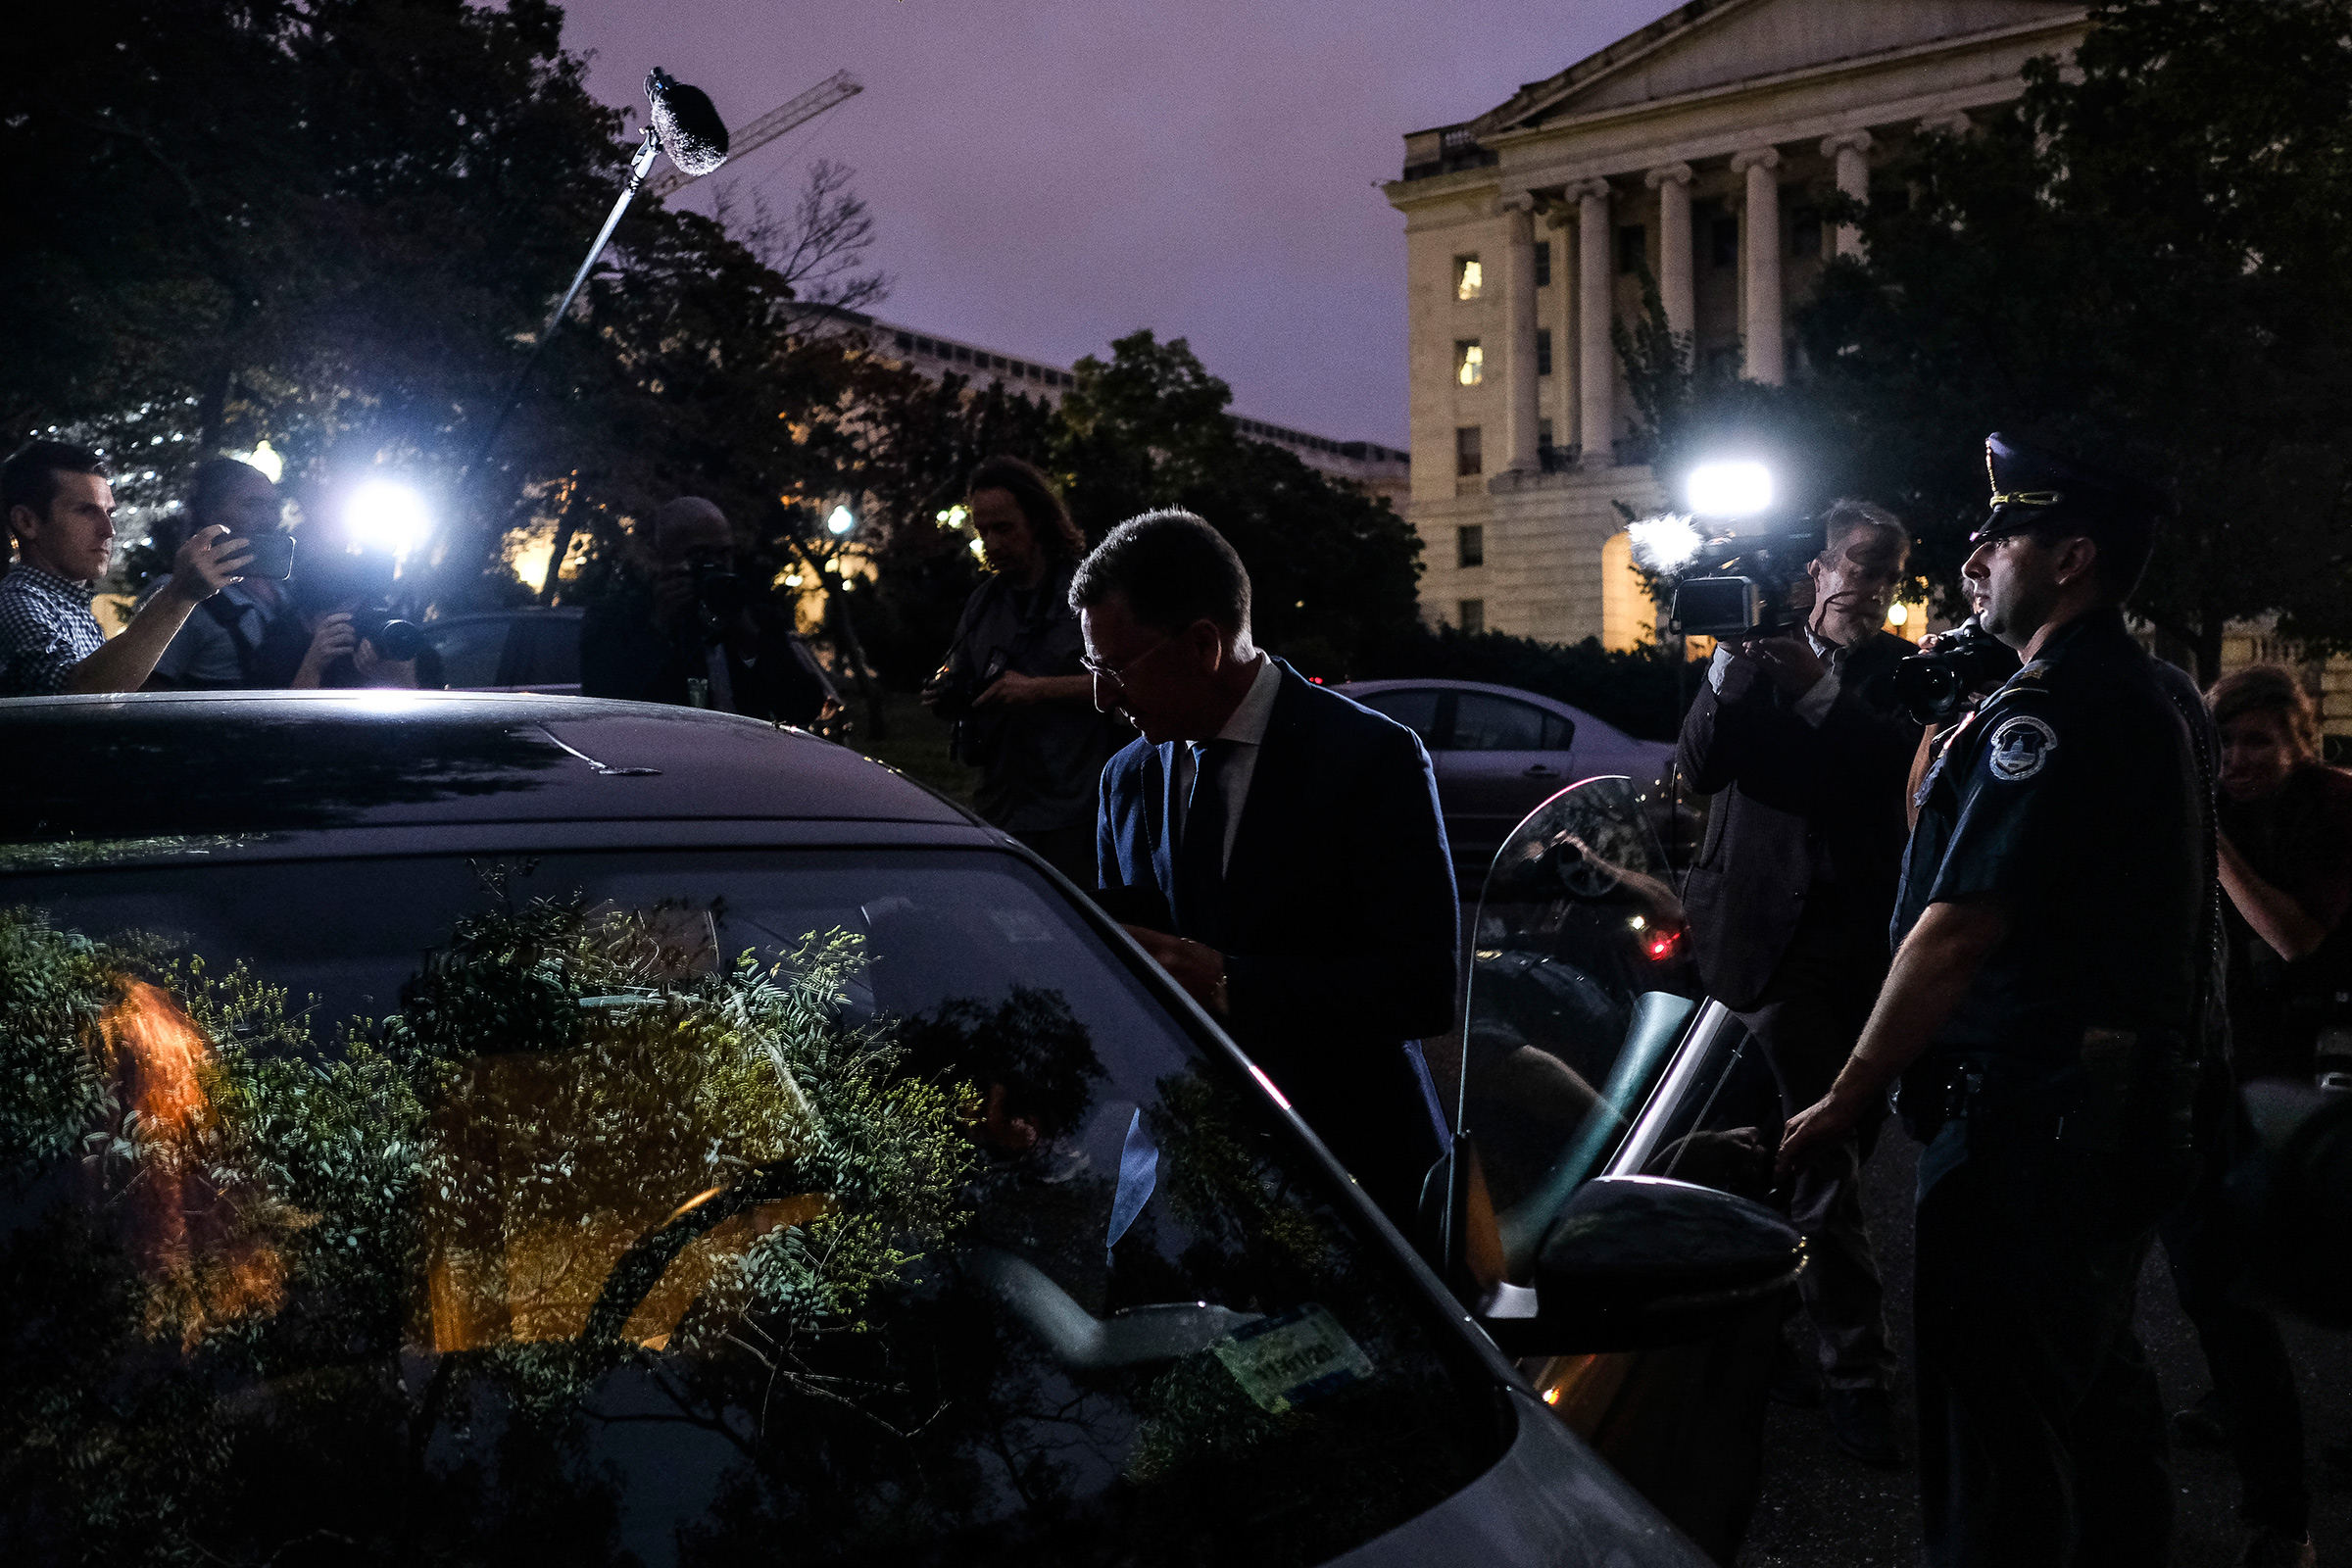 Kurt Volker, former U.S. envoy to Ukraine, leaves the Capitol after delivering hours of testimony in Washington, D.C., on Oct. 3. (Gabriella Demczuk for TIME)